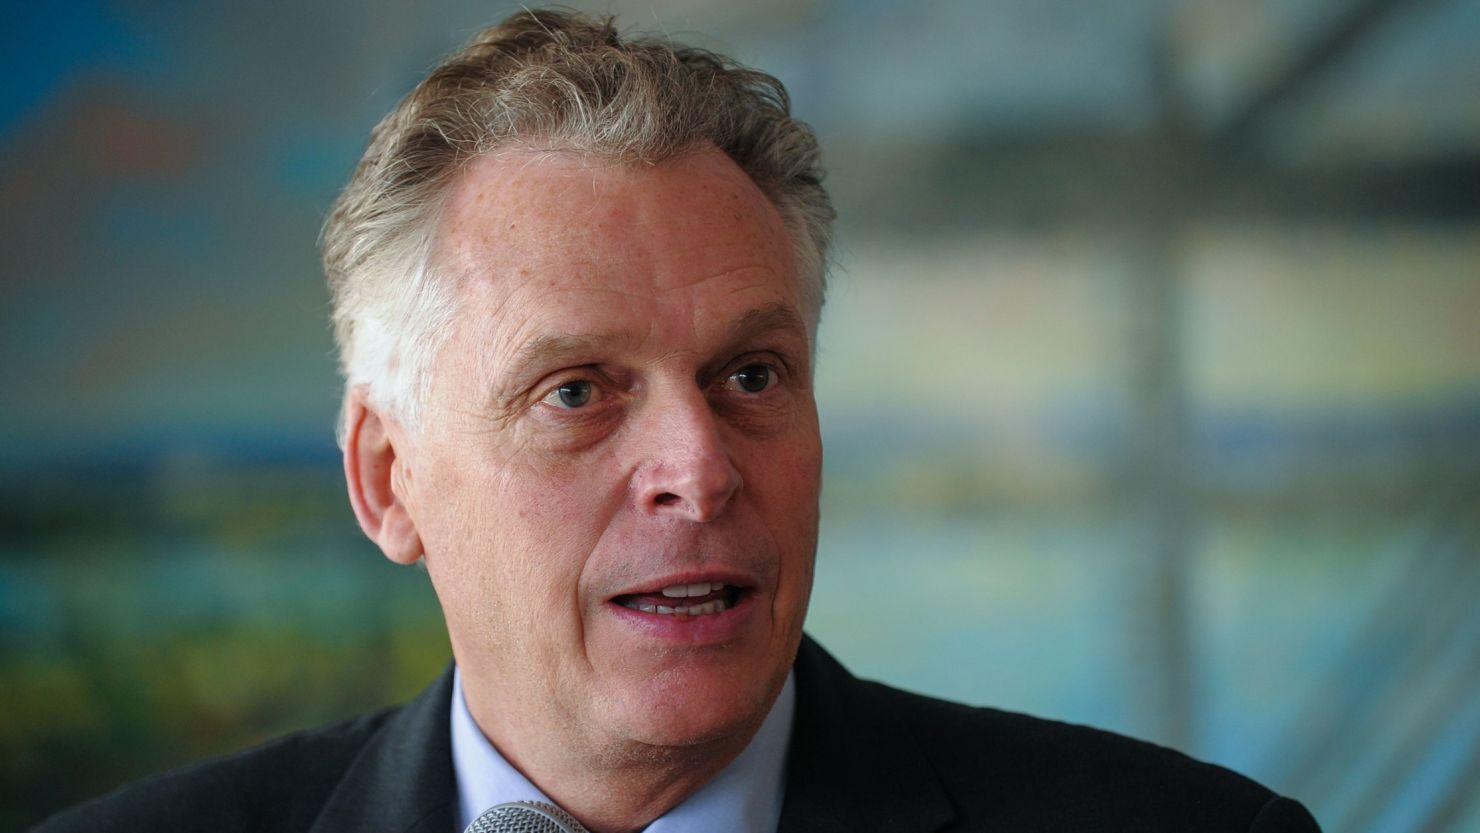 Virginia Gov. Terry McAuliffe speaks during a press conference at the Mariel development zone in Mariel, Artemisa Province, Cuba, on January 5, 2016. 